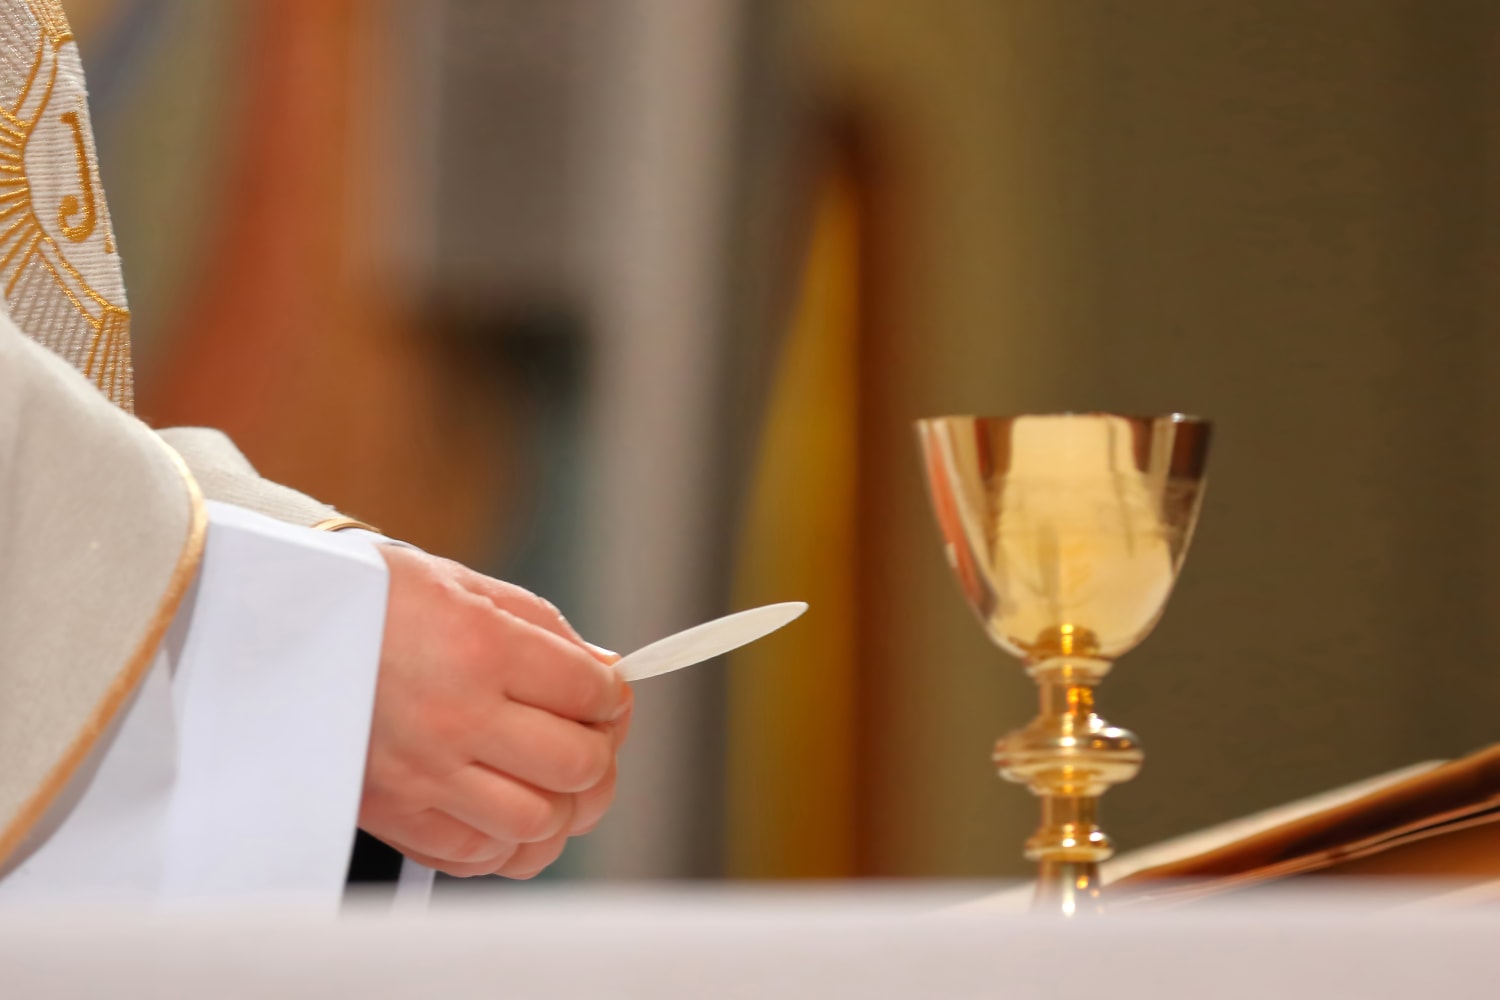 Catholic diocese says gay and trans people can’t be baptized or receive communion